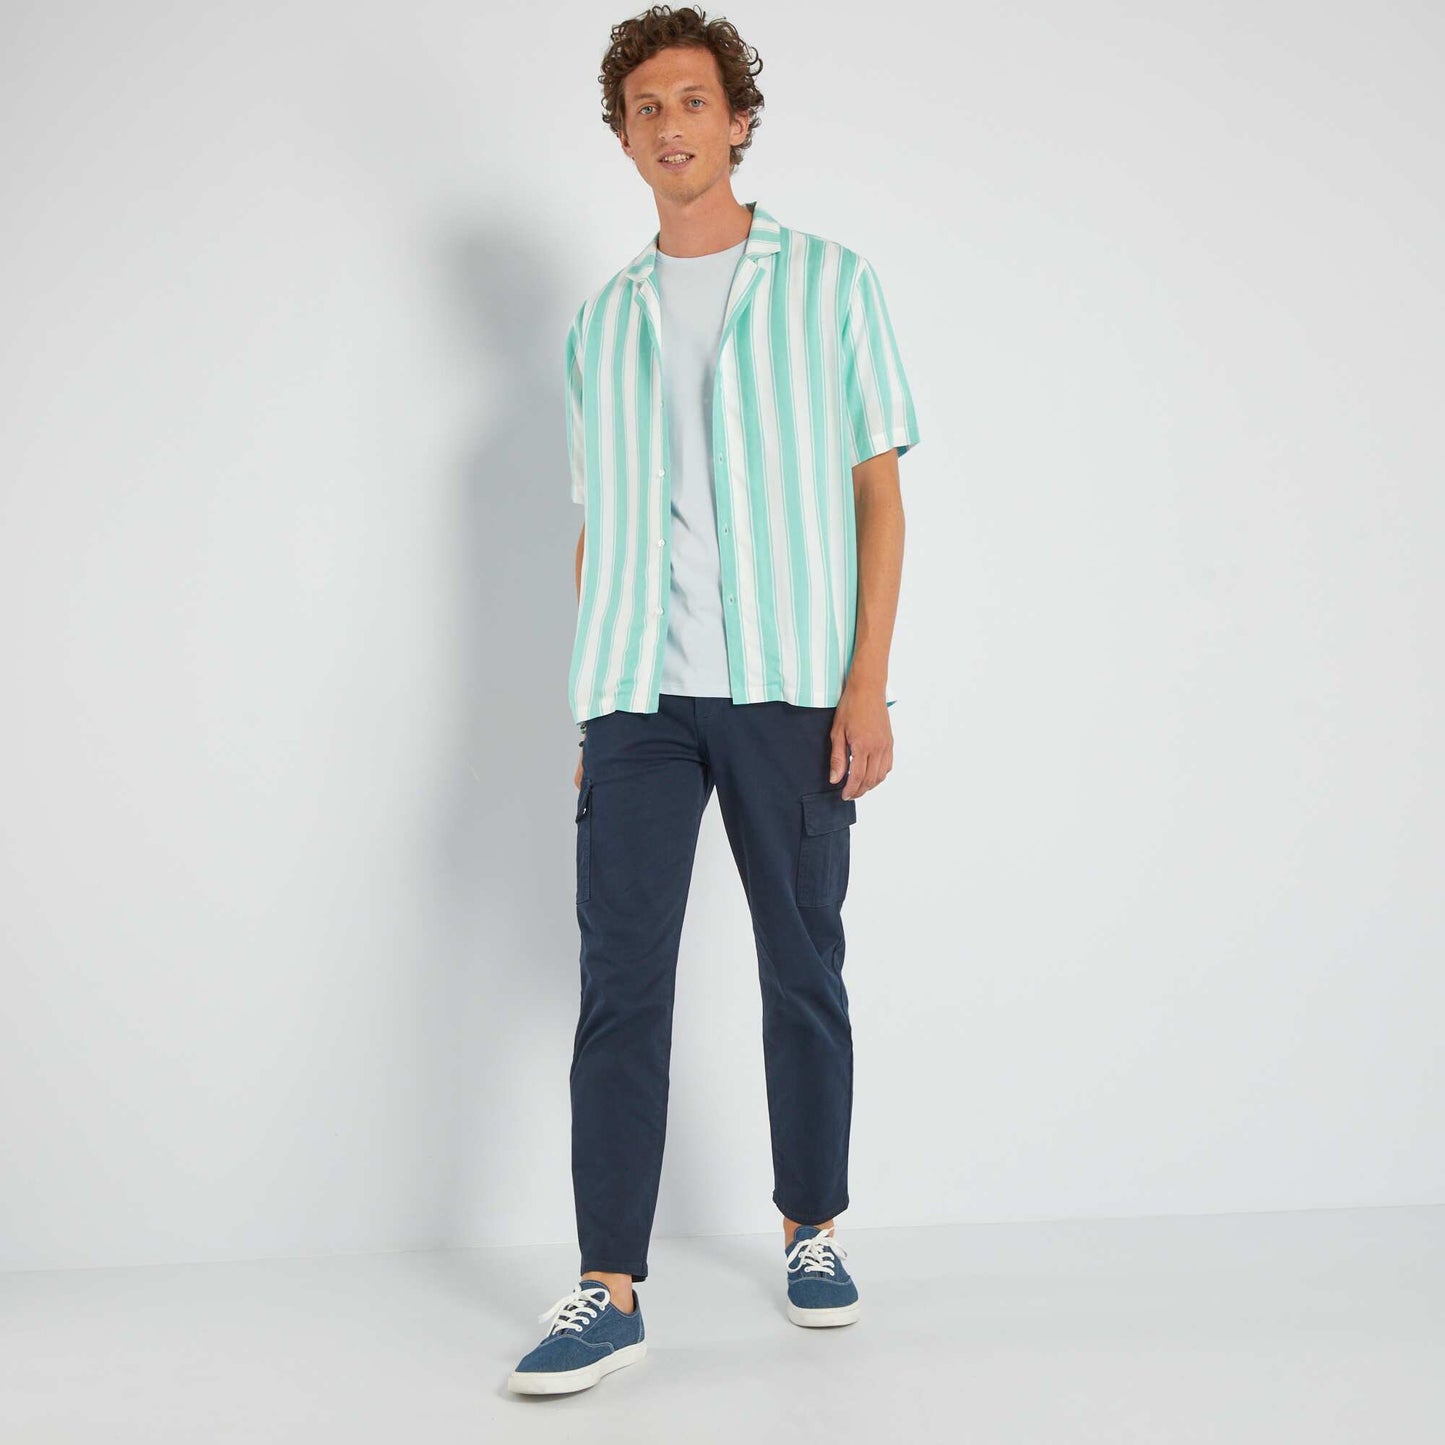 Light and flowing striped shirt BLUE